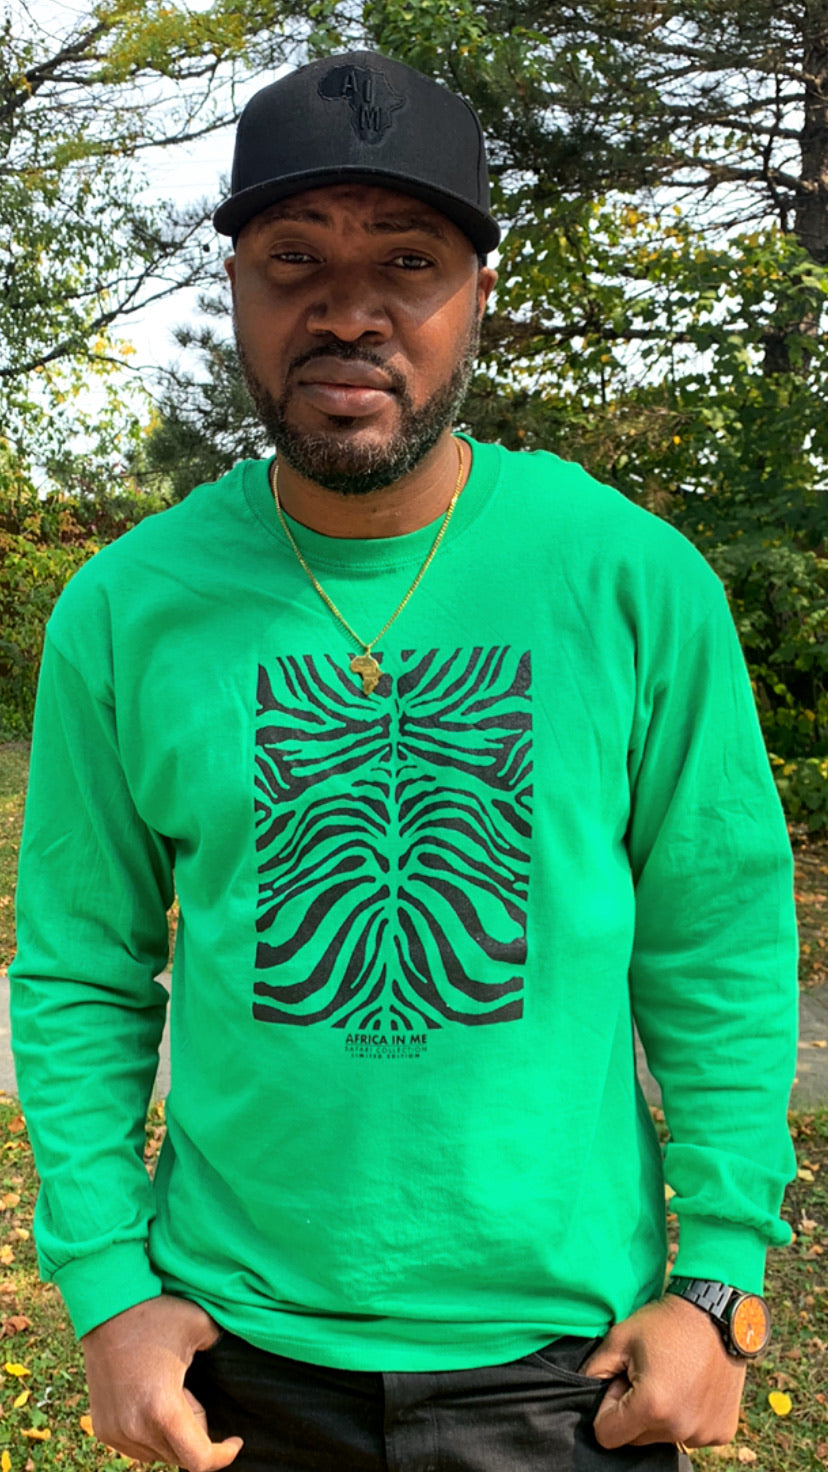 Zebra Long Sleeved Tee : Africa In Me Safari collection